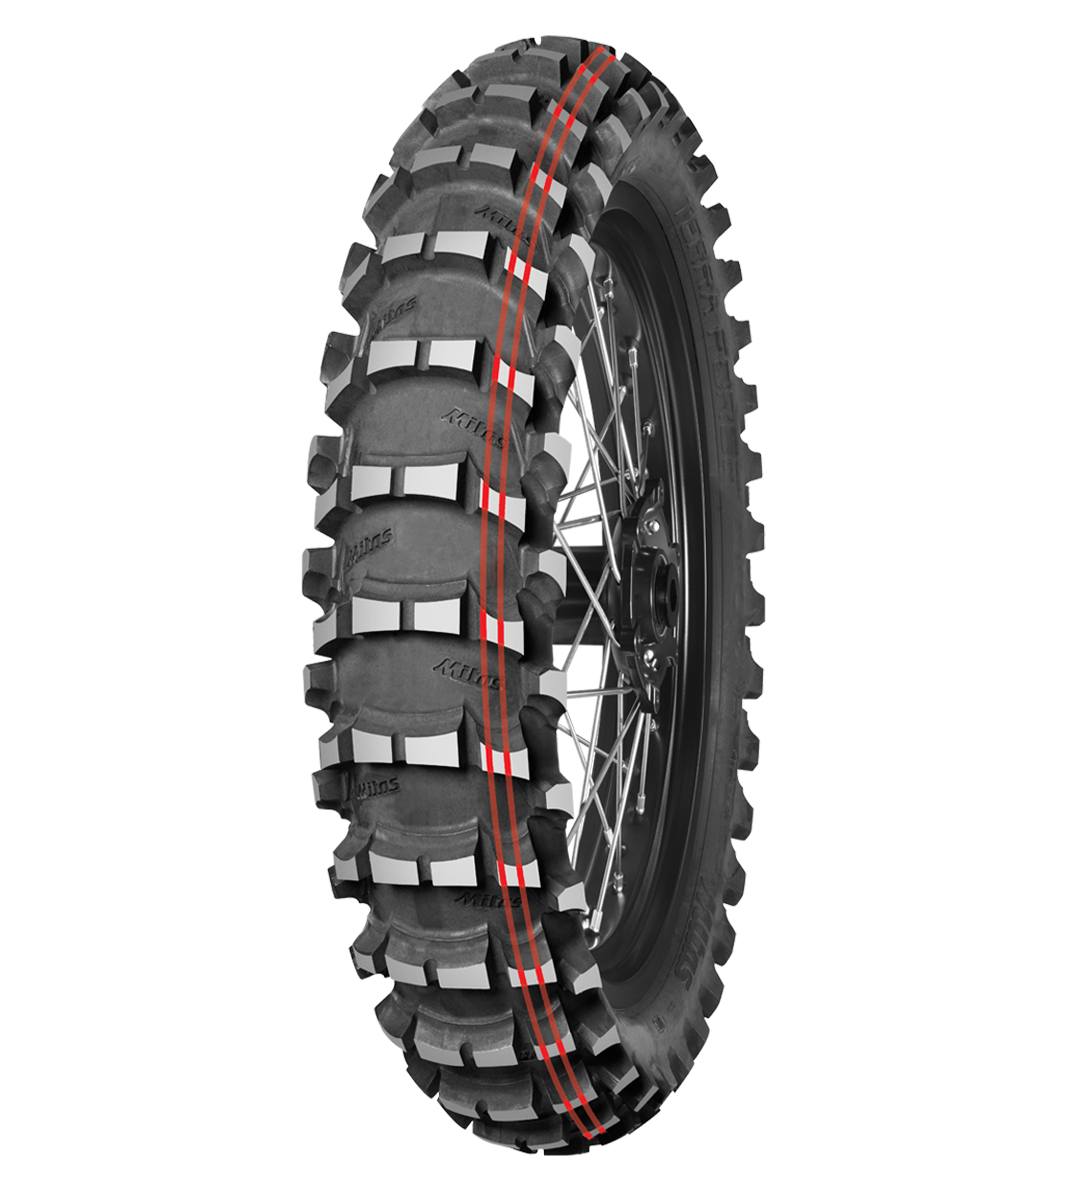 Mitas TERRA FORCE-MX Sand 110/90-19 Motocross Competition Off-Road Sand 62M 2 Red Tube Rear Tire, 226647, 110/90-19, Motocross, Motocross Competition, Off-Road, Rear, Terra Force, Terra Force-MX Sand, Trail, Tires - Imported and distributed in North & South America by Lindeco Genuine Powersports - Premier Powersports Equipment and Accessories for Motorcycle Enthusiasts, Professional Riders and Dealers.